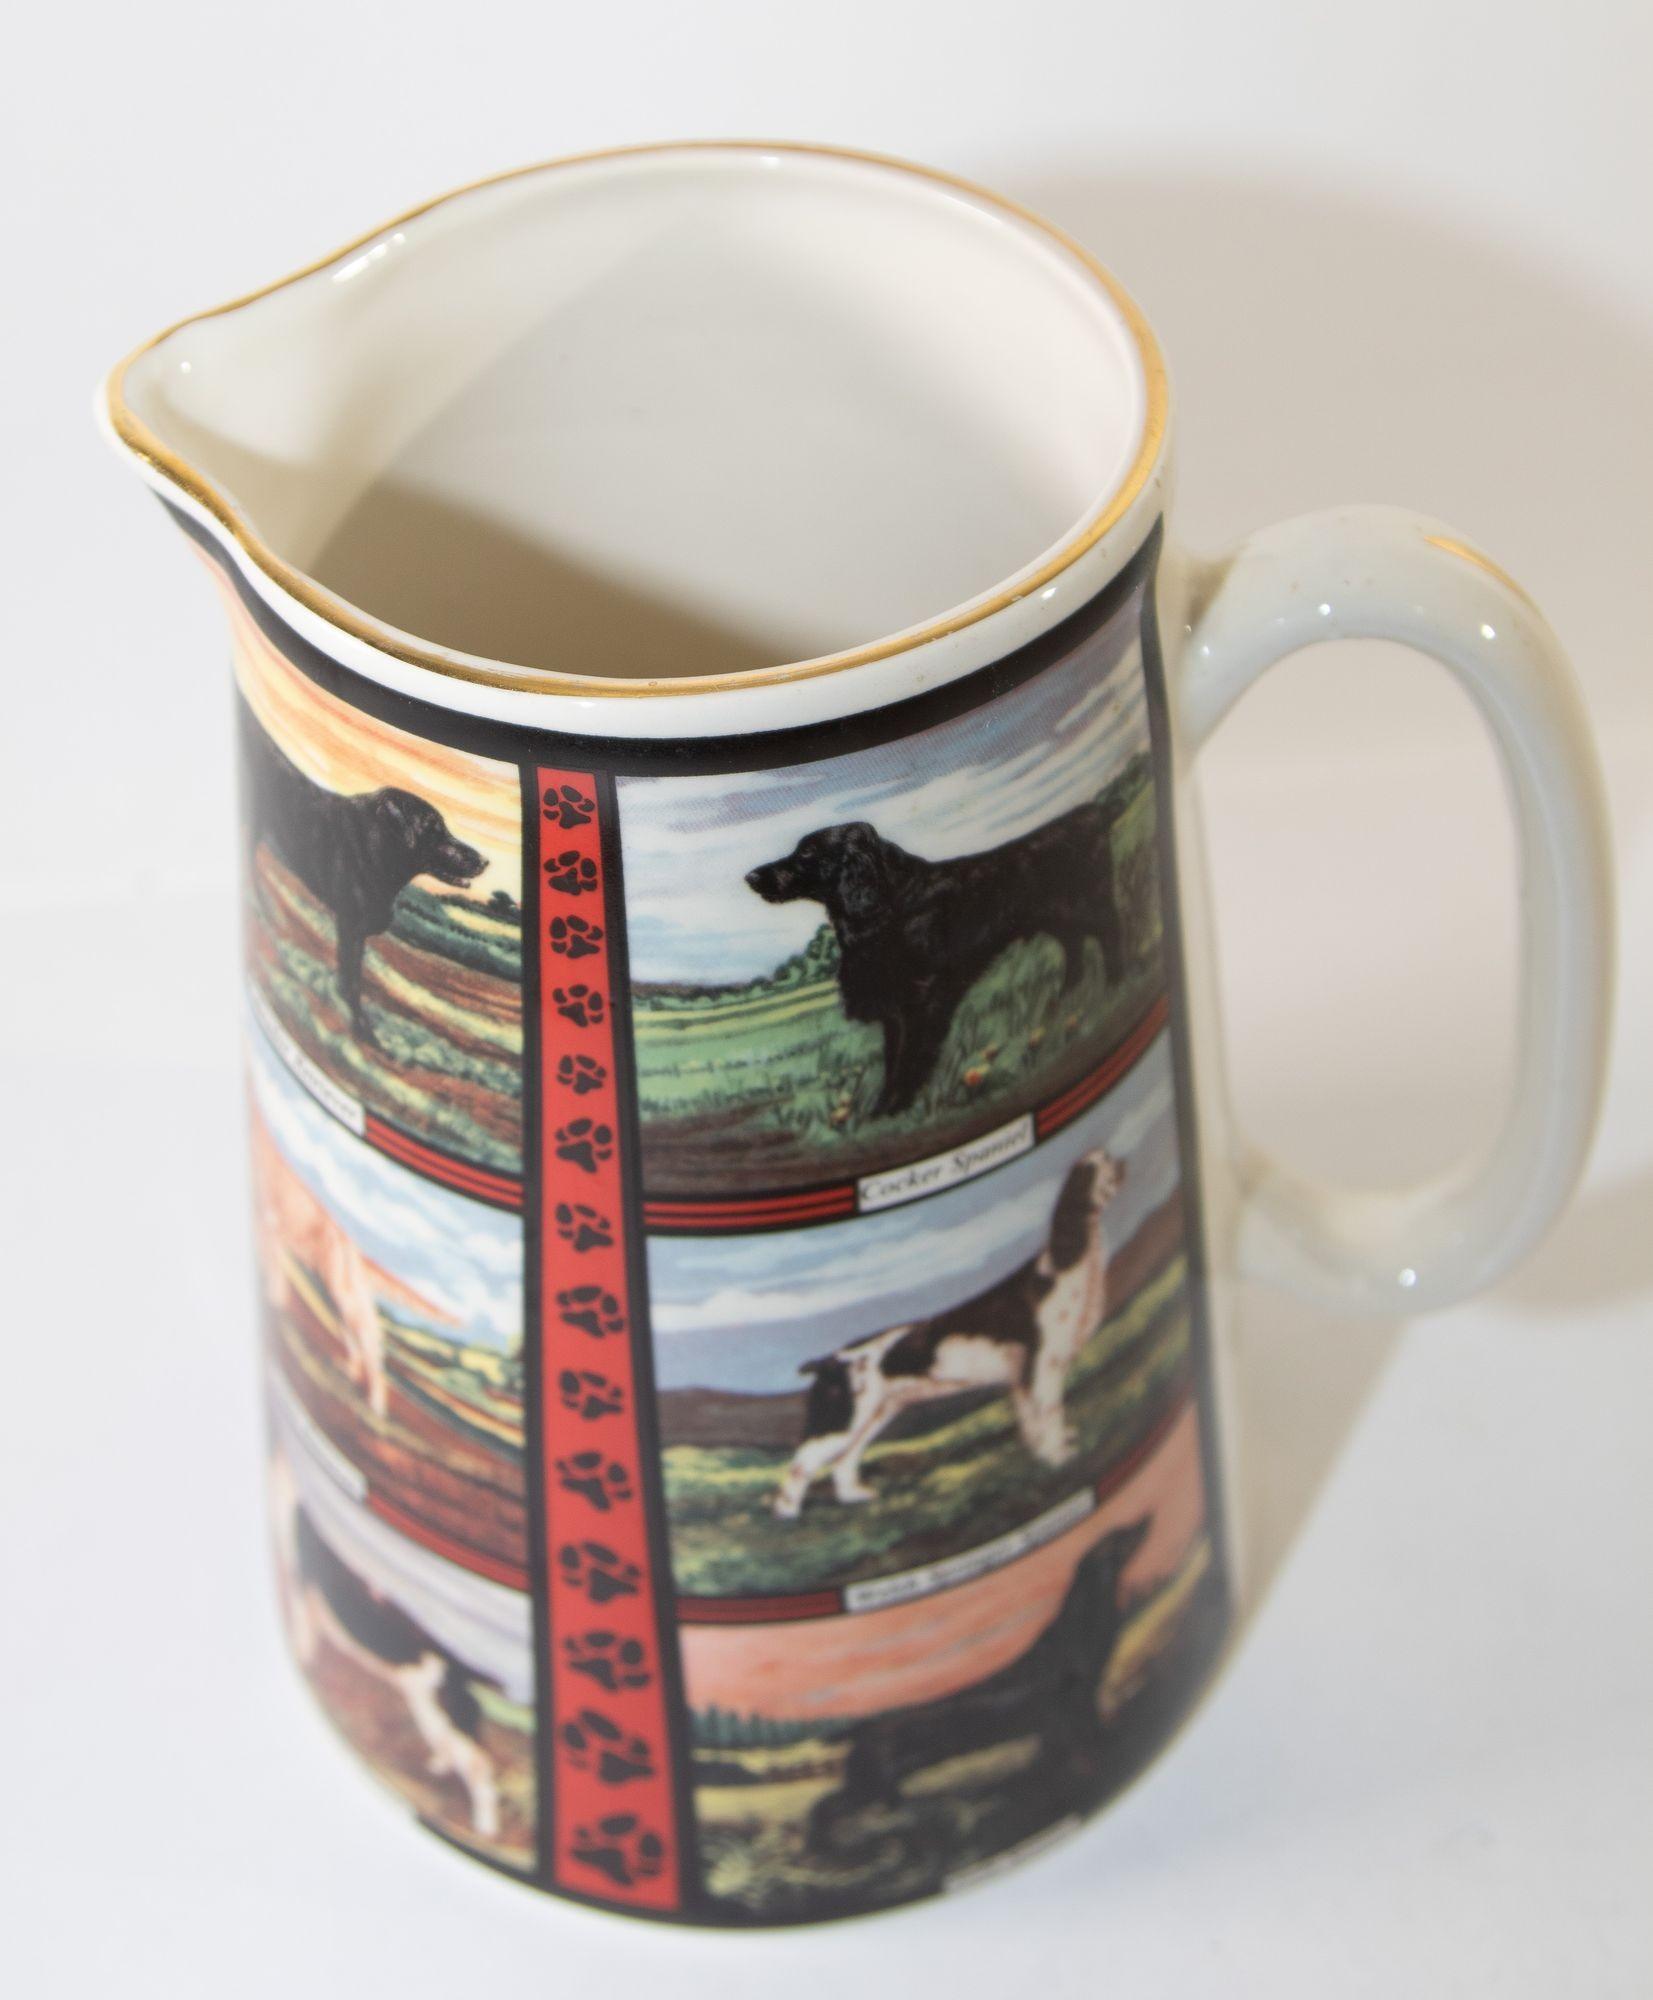 English Vintage 1970s Ceramic Pitcher, Derbyshire England with Dog Breeds Pictures For Sale